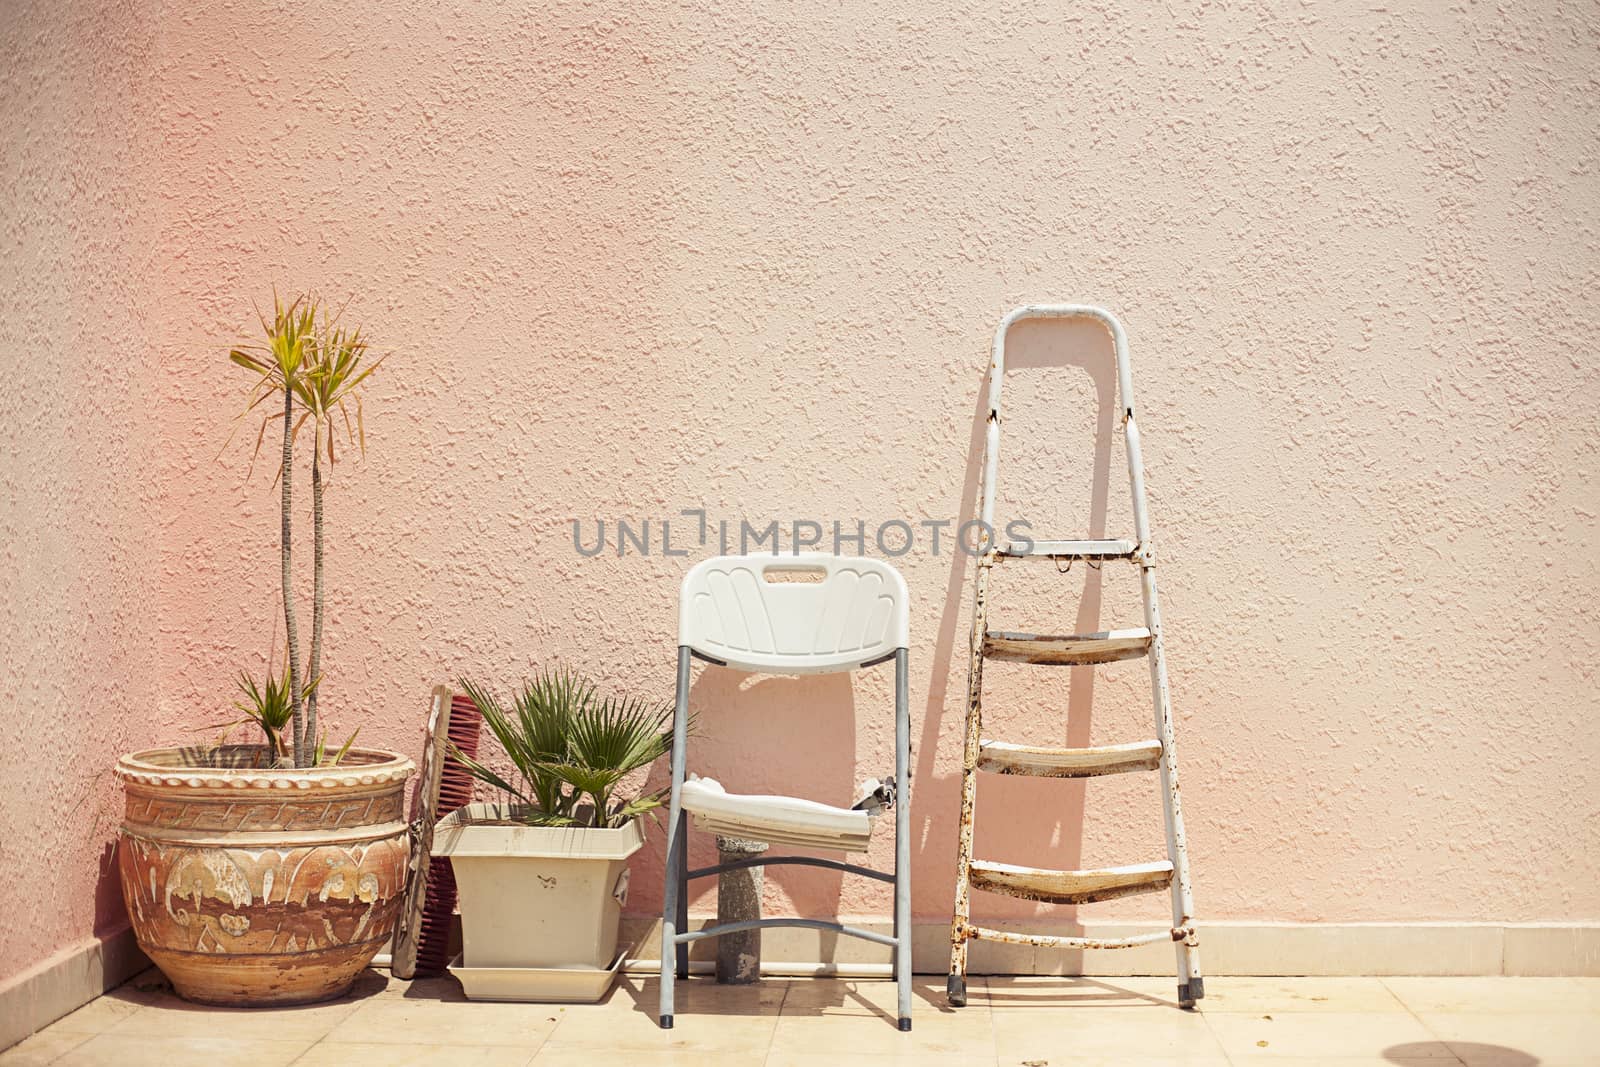 Mainstream fashion photo. Objects standing in a row stepladder chair pot on wall background